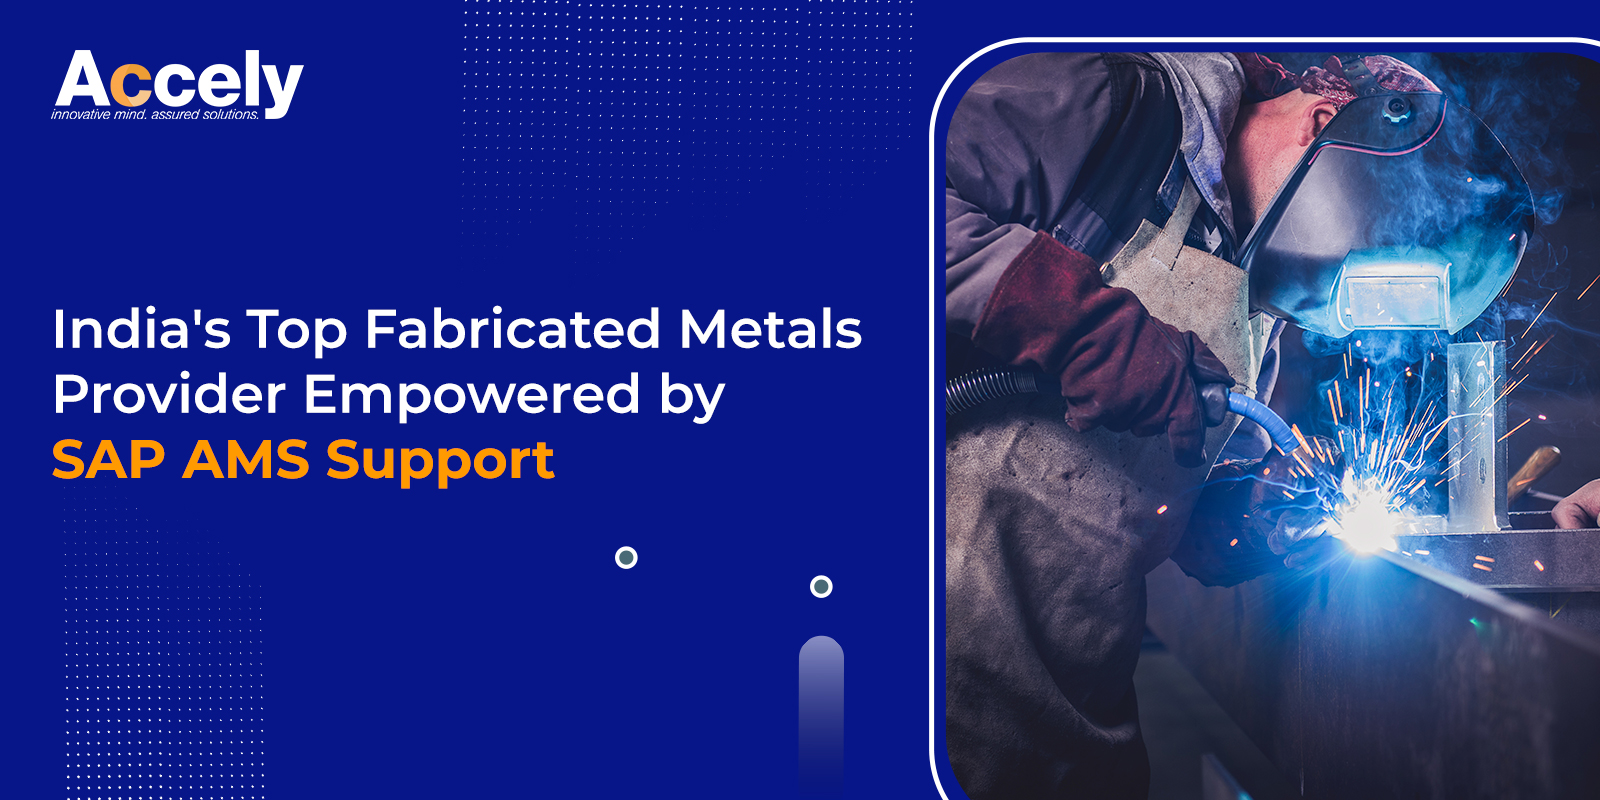 India's Top Fabricated Metals Provider Empowered by SAP AMS Support